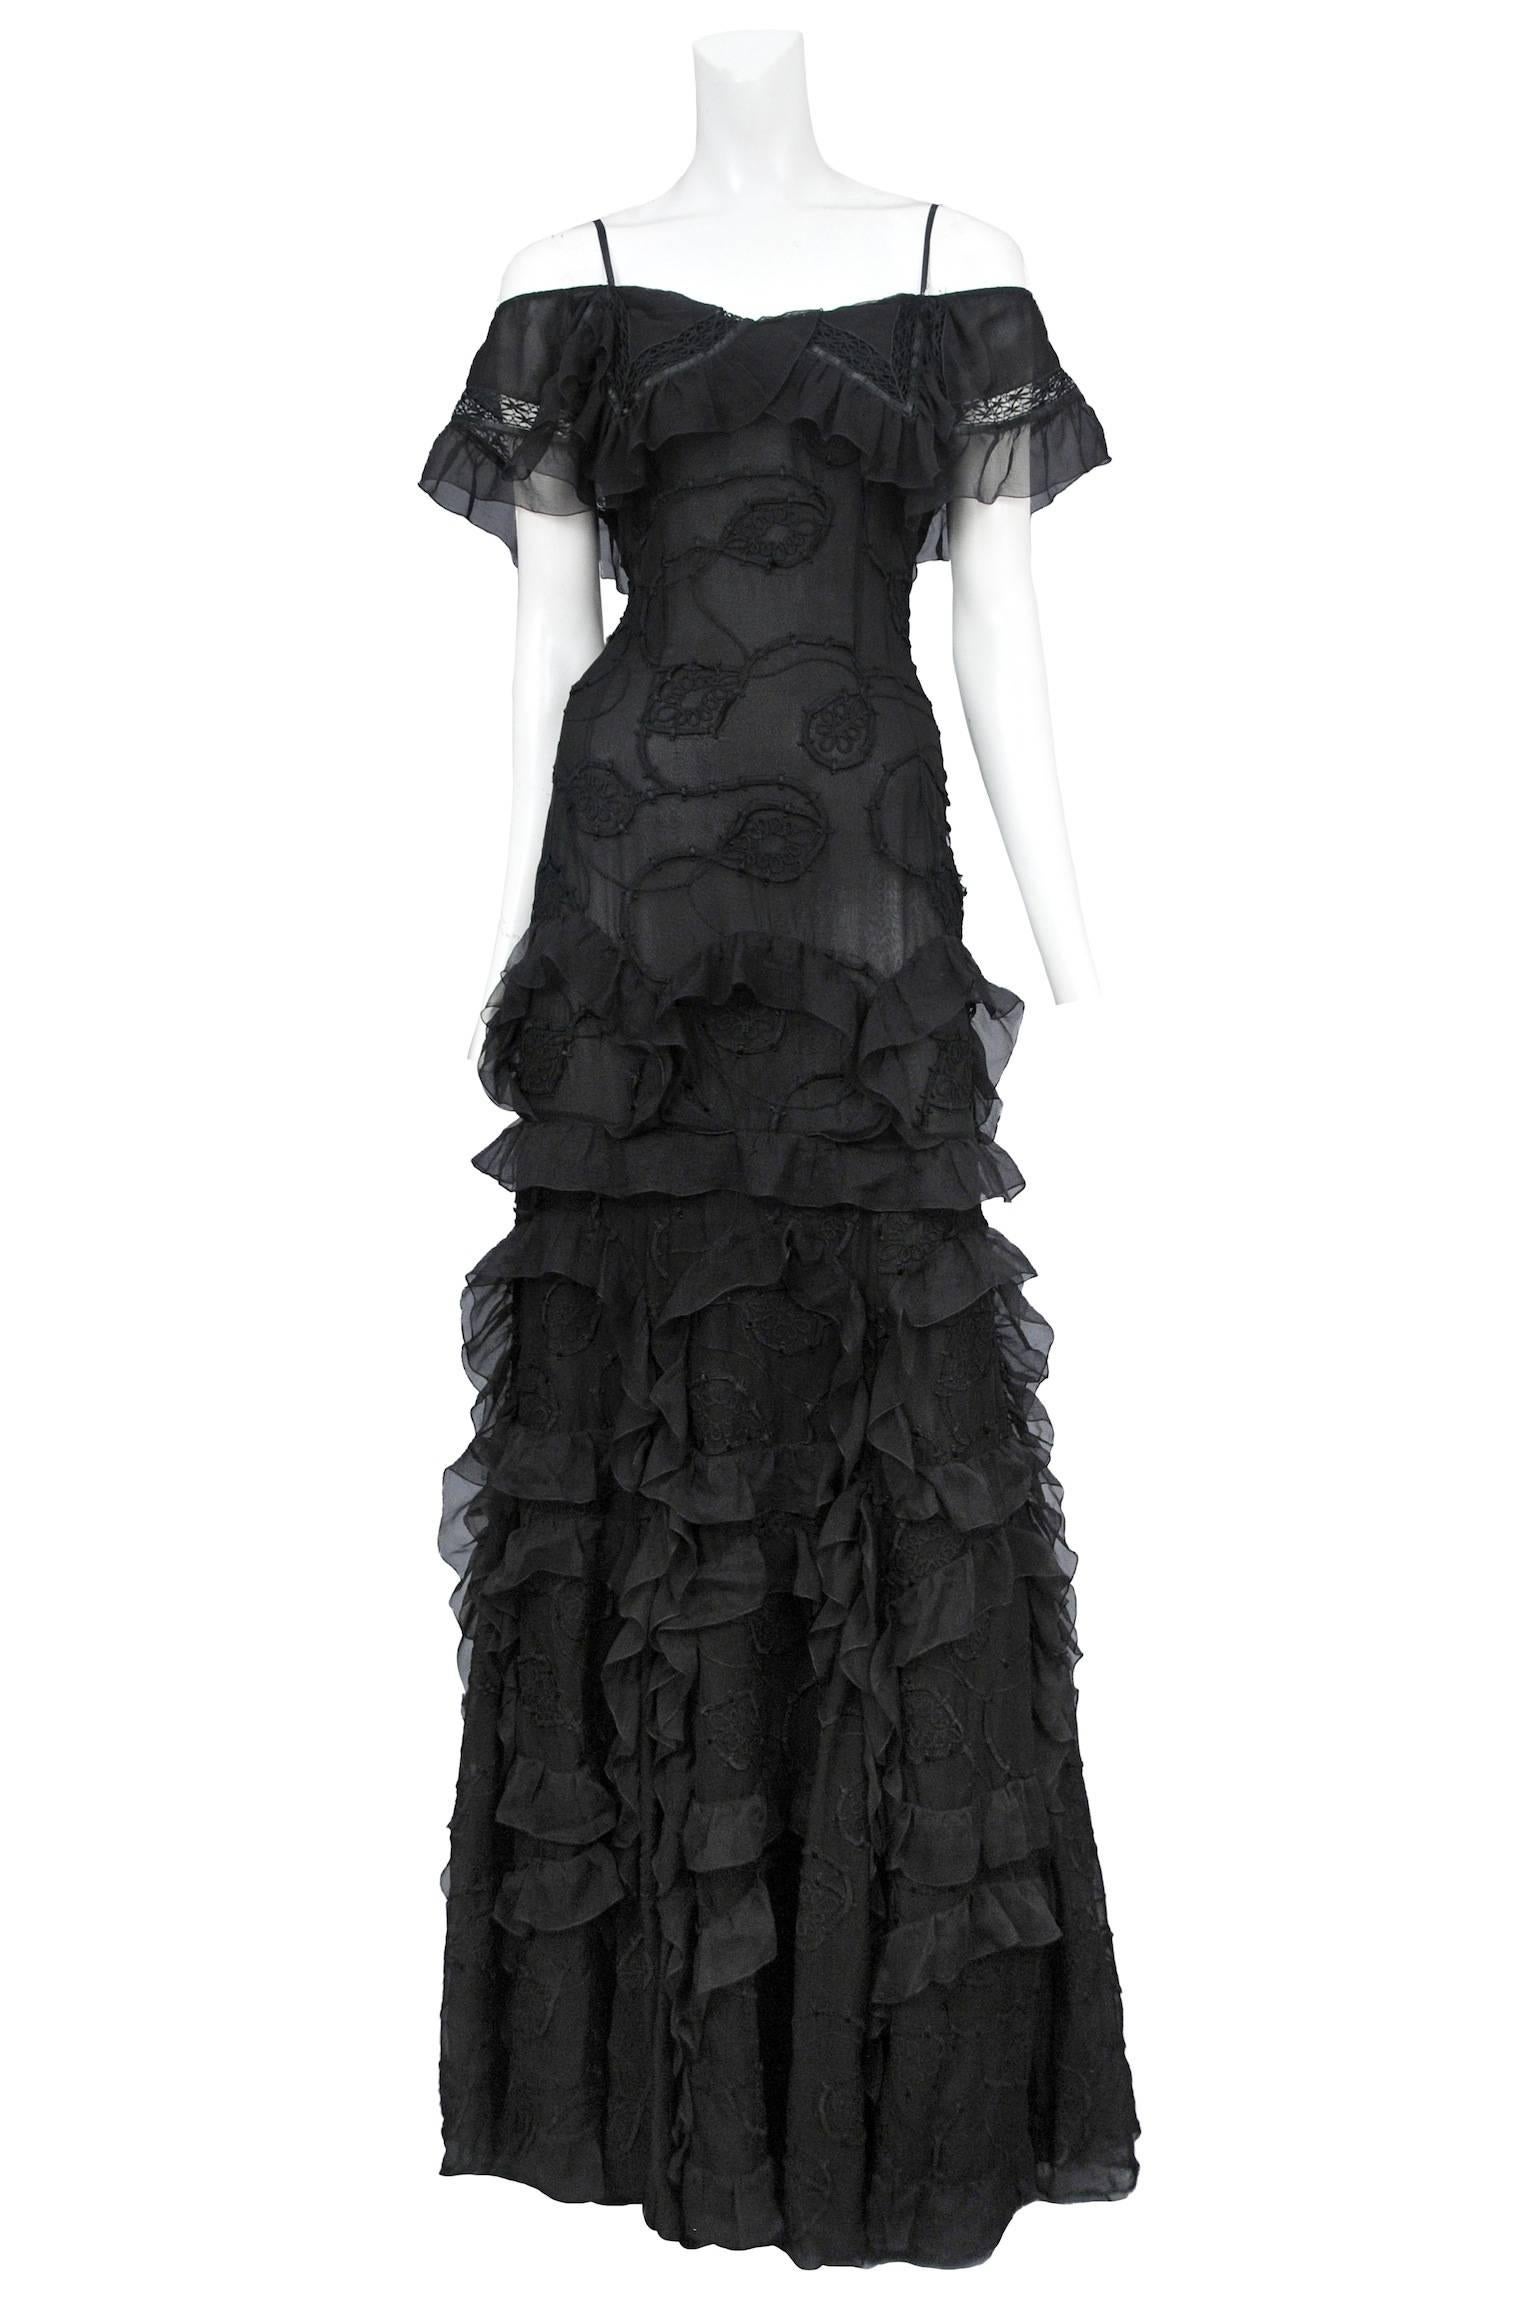 Vintage John Galliano black floor length gown featuring an off the shoulder neckline anchored by two spaghetti straps, tiers of curved ruffles adorn the skirt and black ribbon embroidery decorates the fitted torso and skirt.

Please contact us for